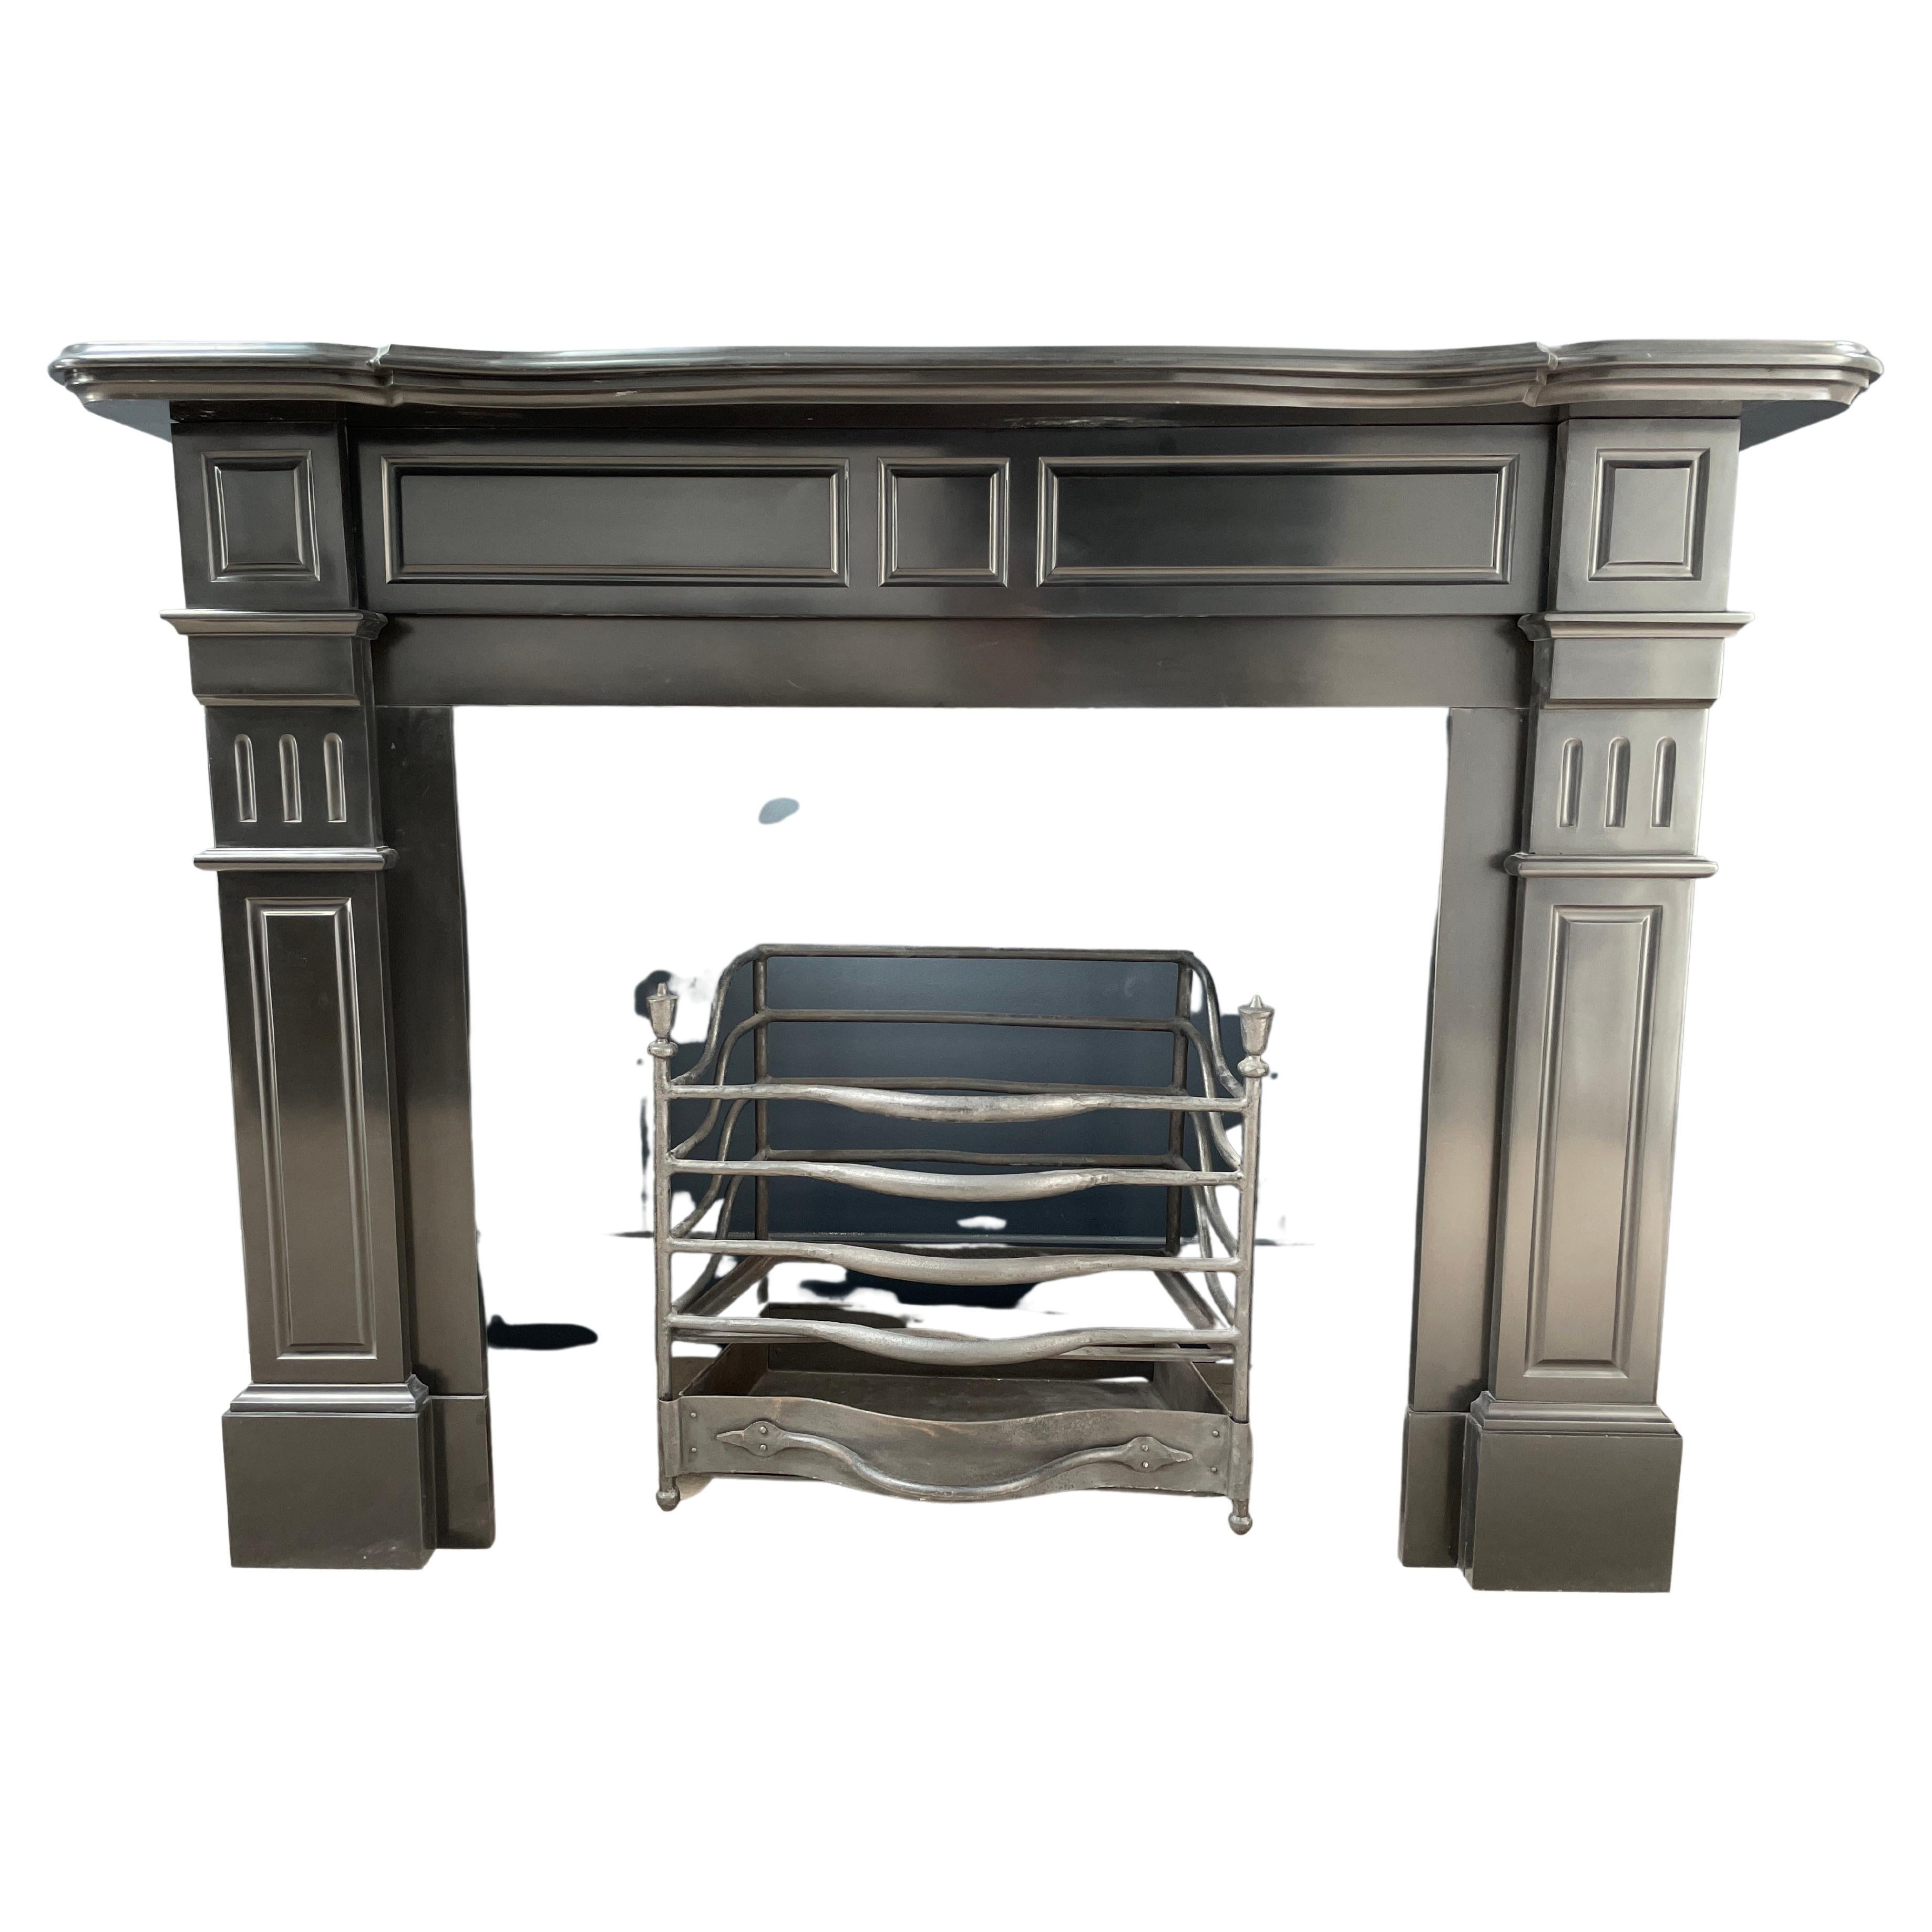 Beautifully Restored Antique Black Circular Fireplace For Sale